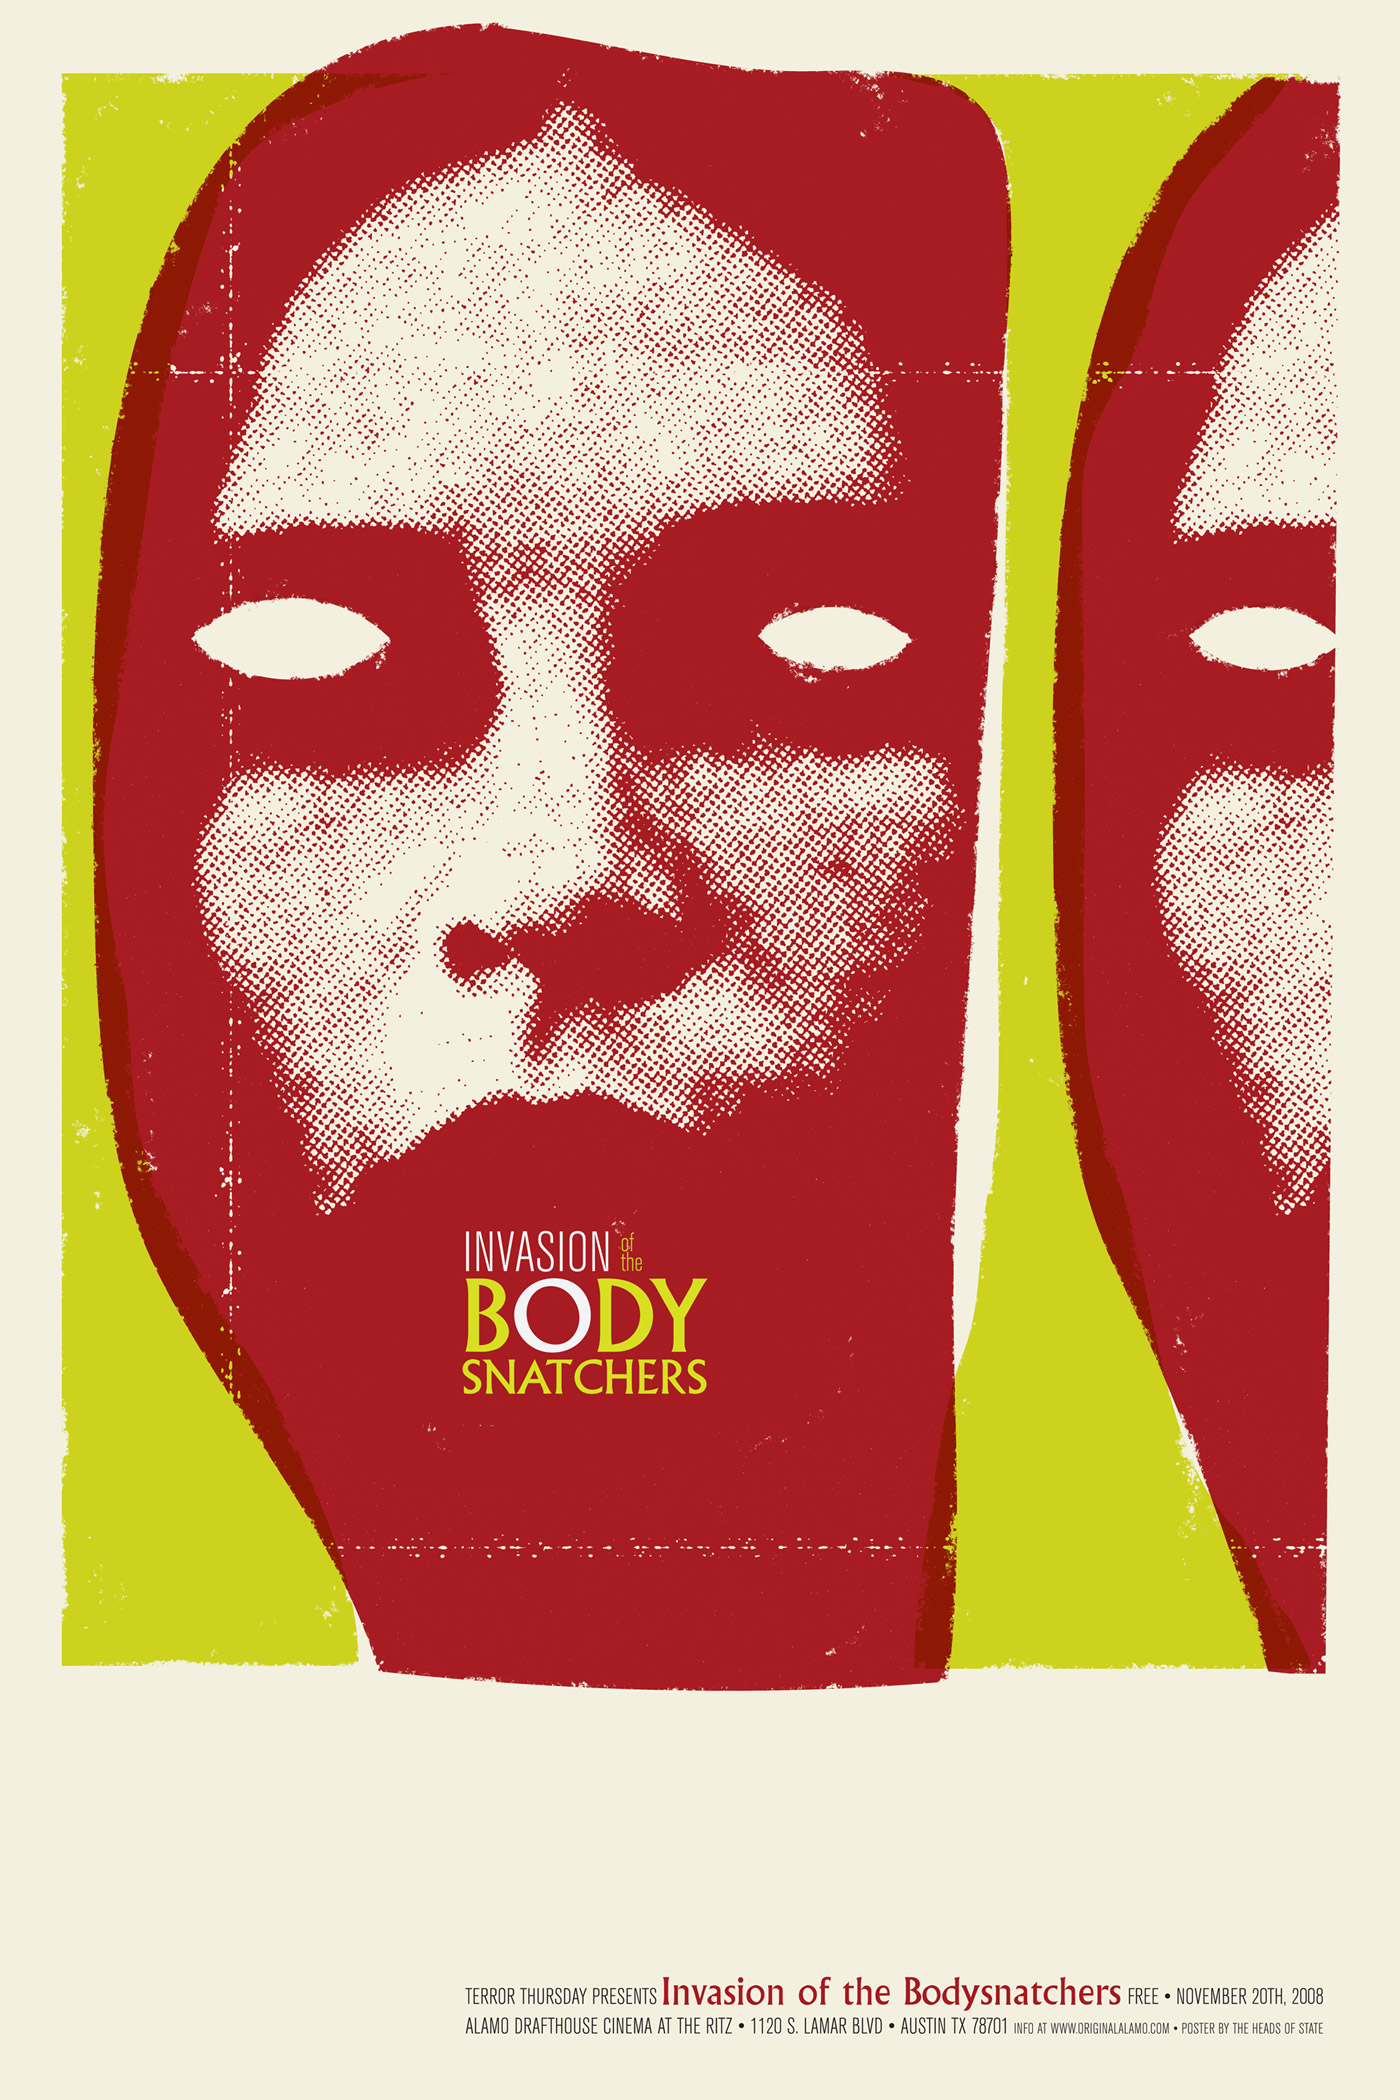 Invasion of the Body Snatchers Poster - The Heads of State